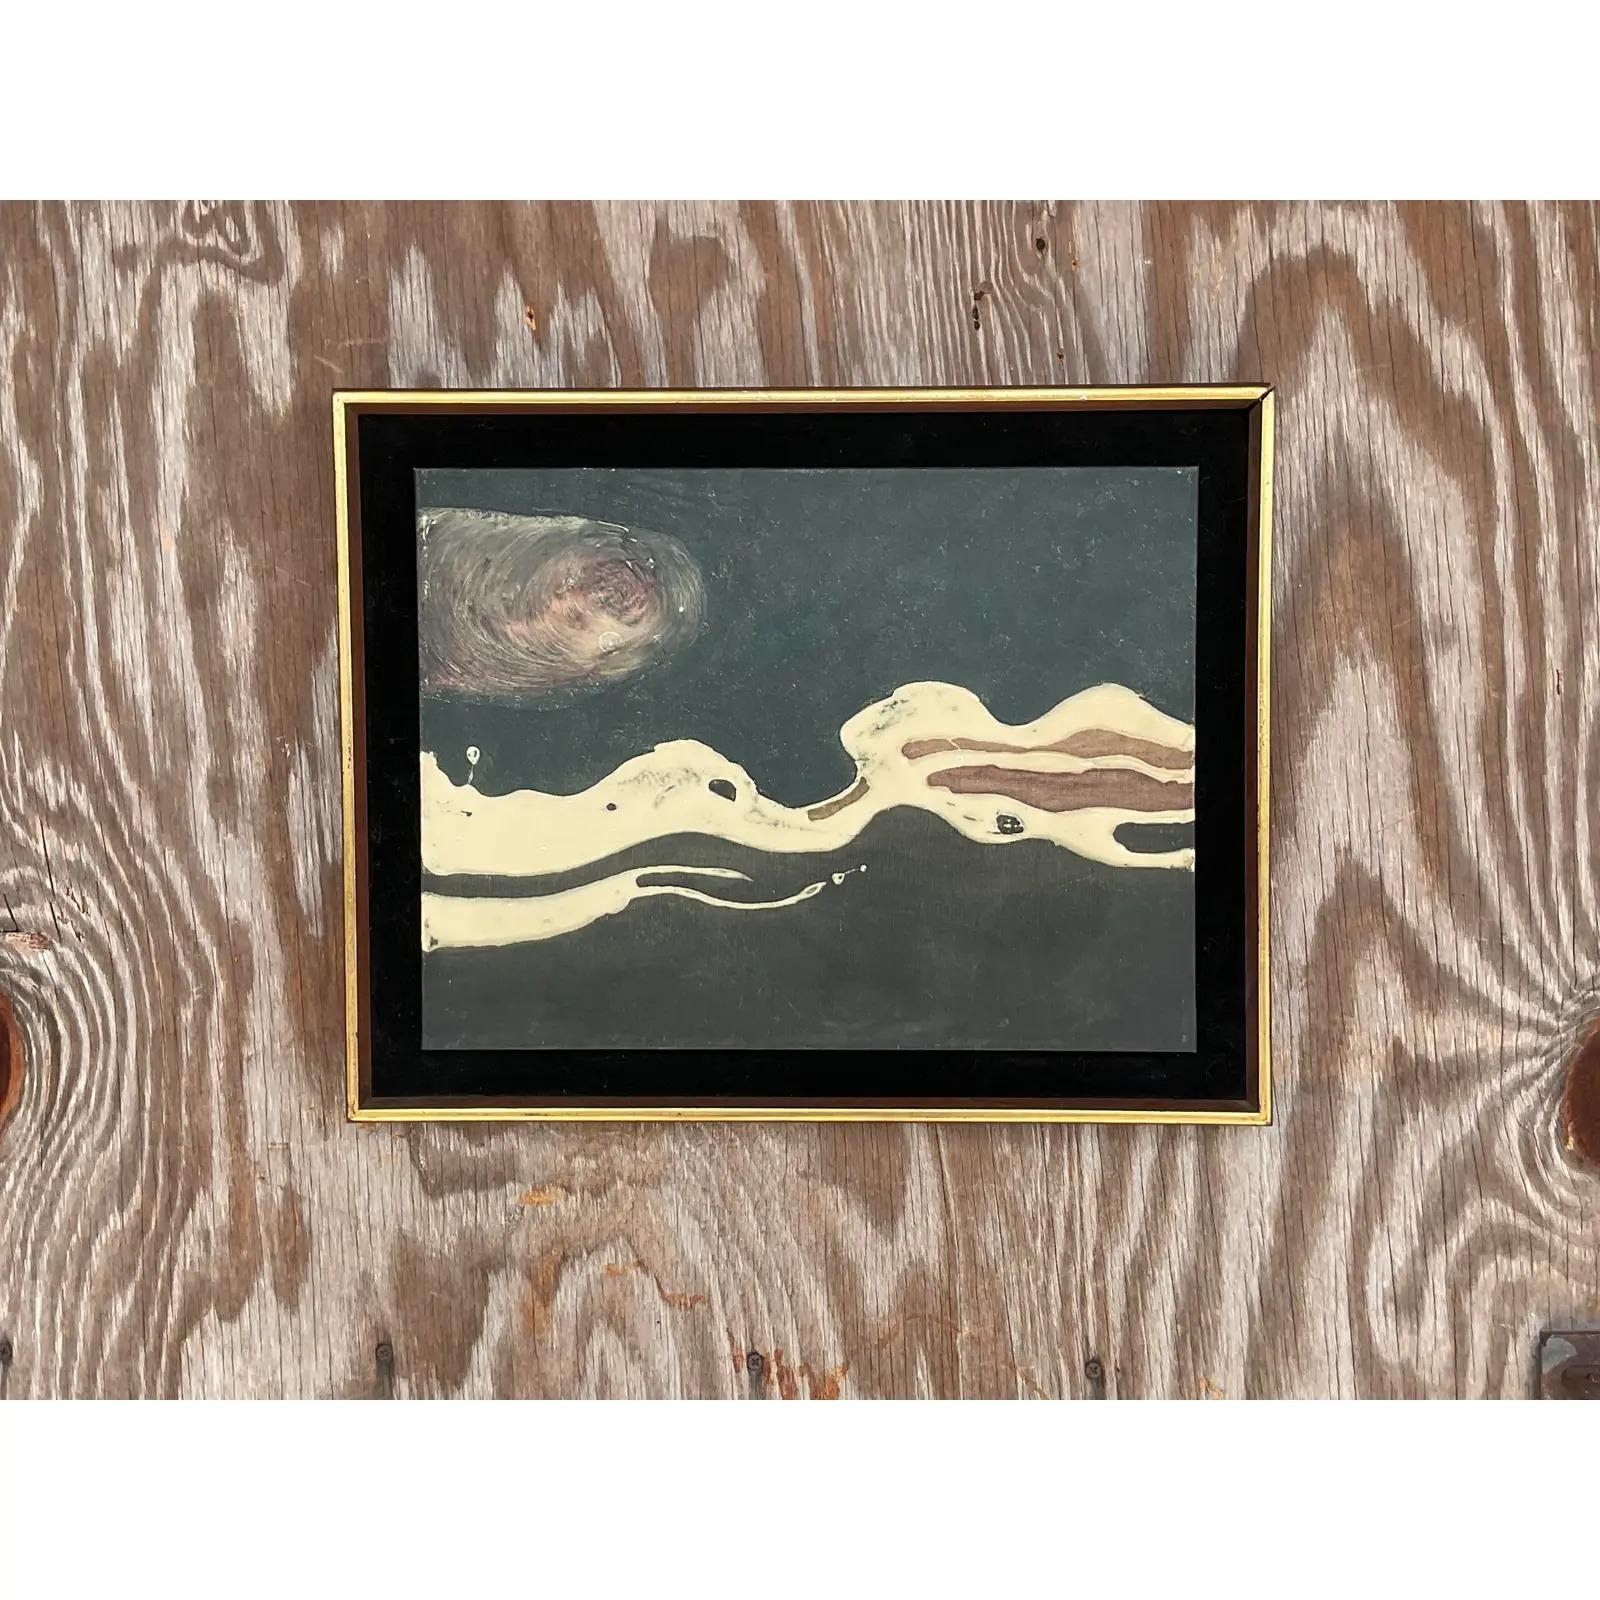 A fantastic vintage 1964 original oil painting. A chic abstract in dark clear colors. Artist info on verso. Acquired from a Chicago estate.